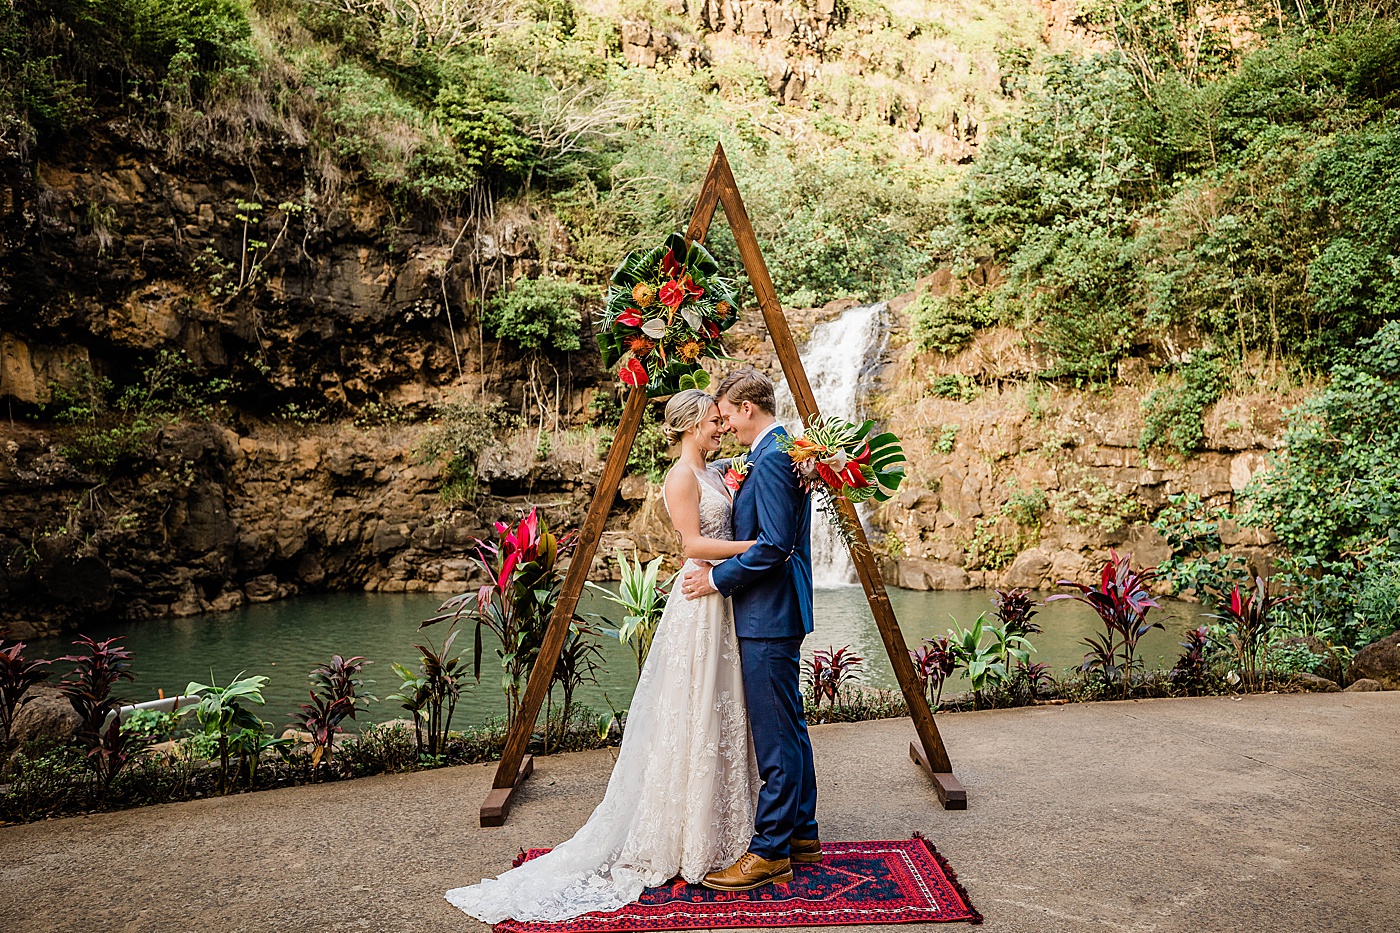 Bride and groom first kiss during Waimea Valley wedding ceremony.